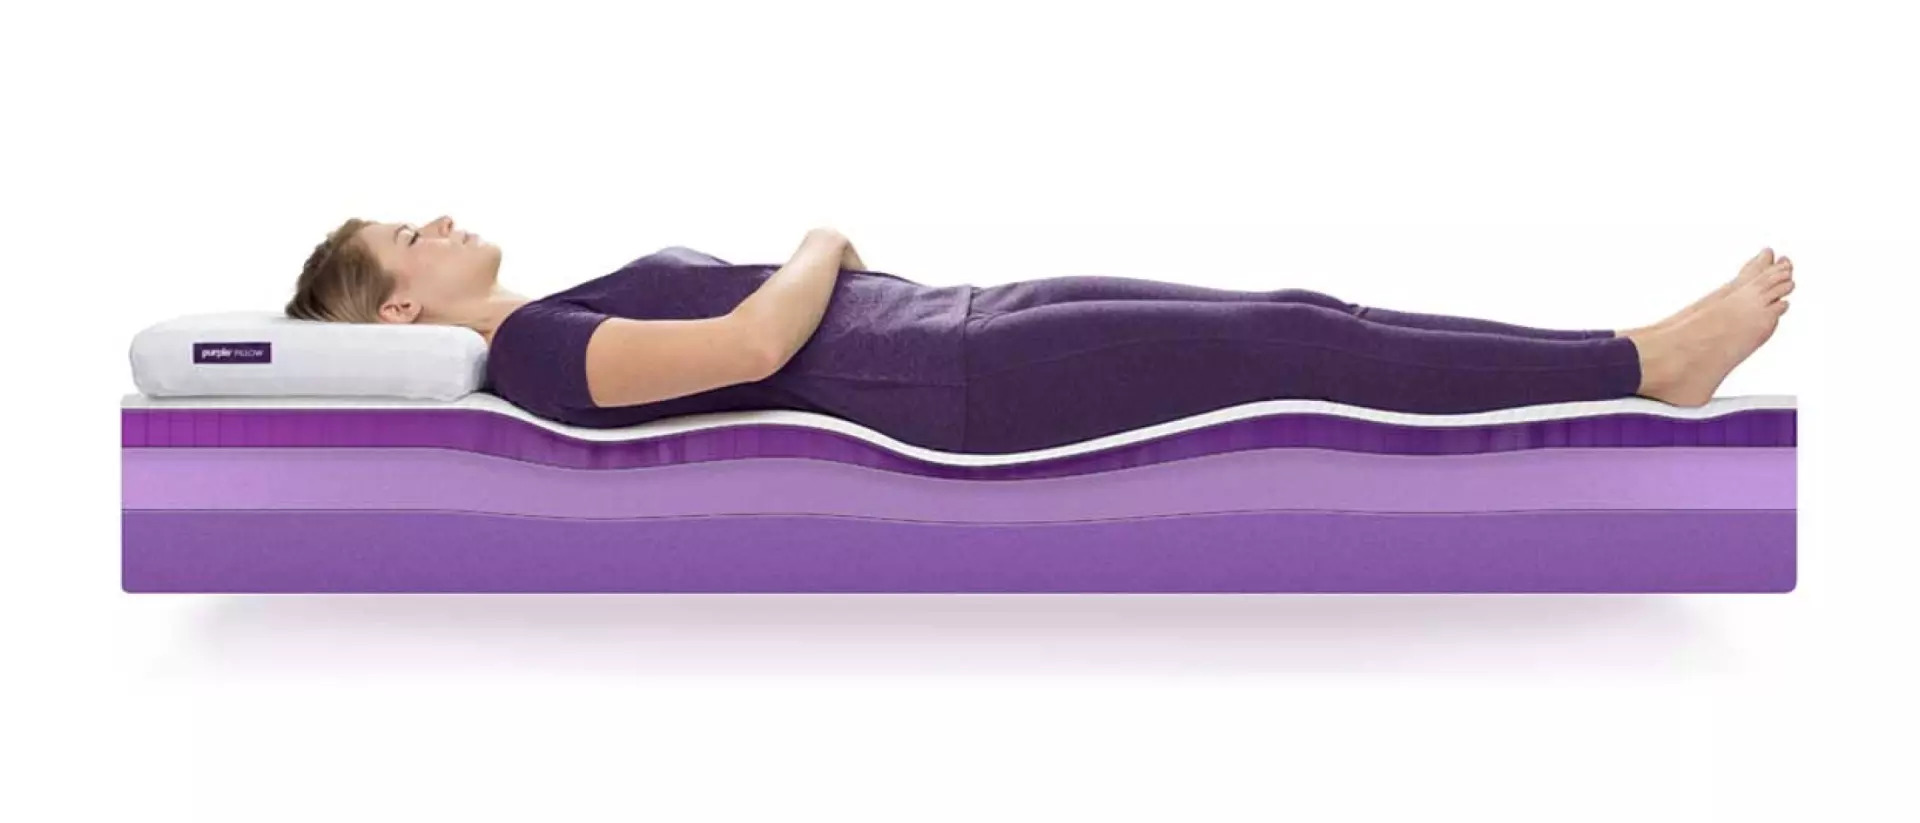 person laying on purple mattress crosssection